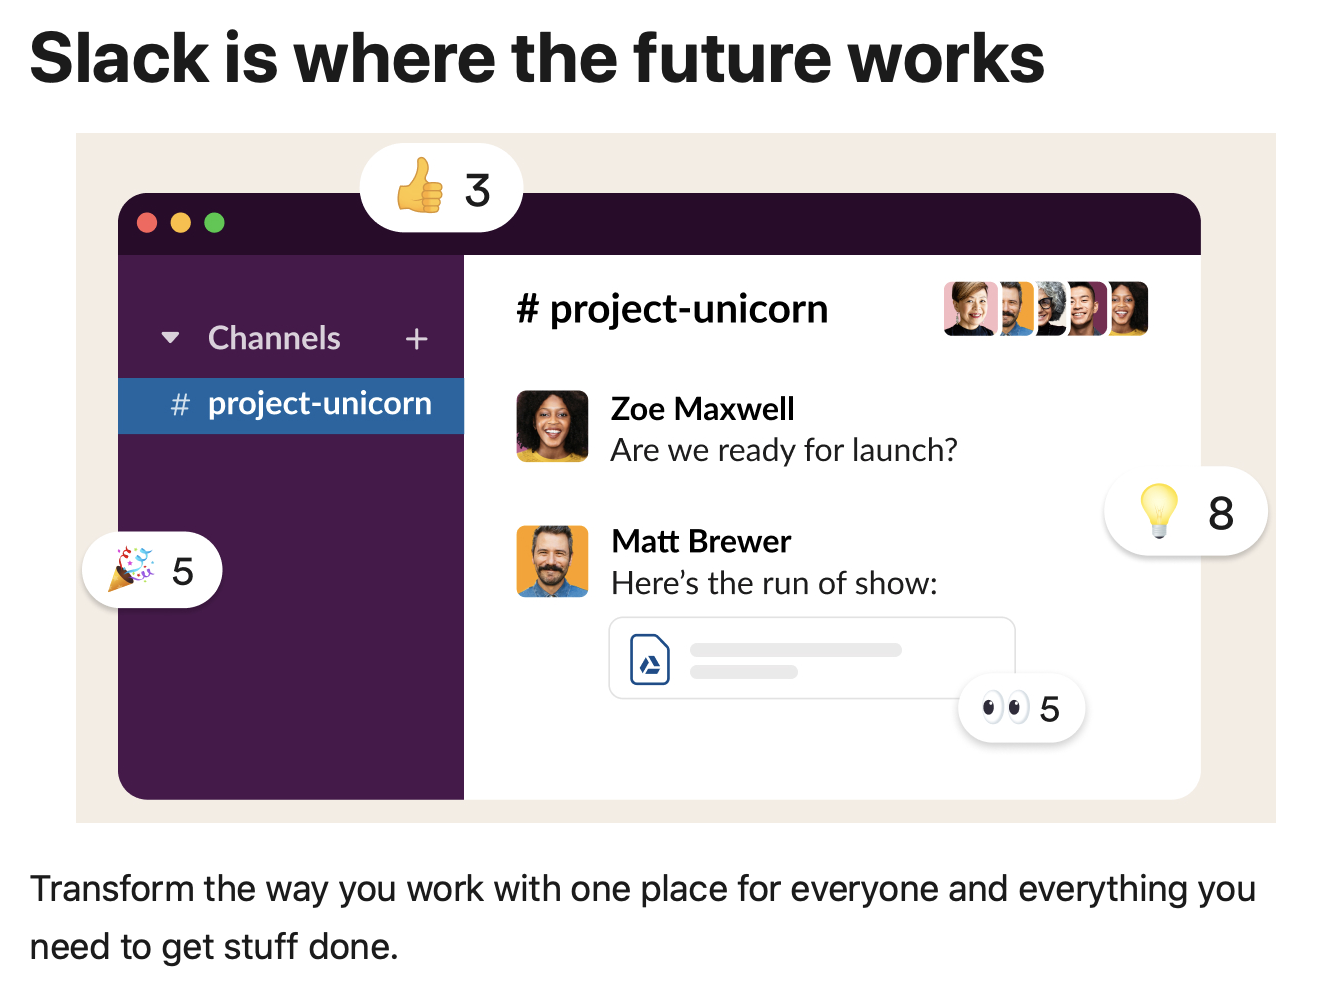 Slack is the future of work.